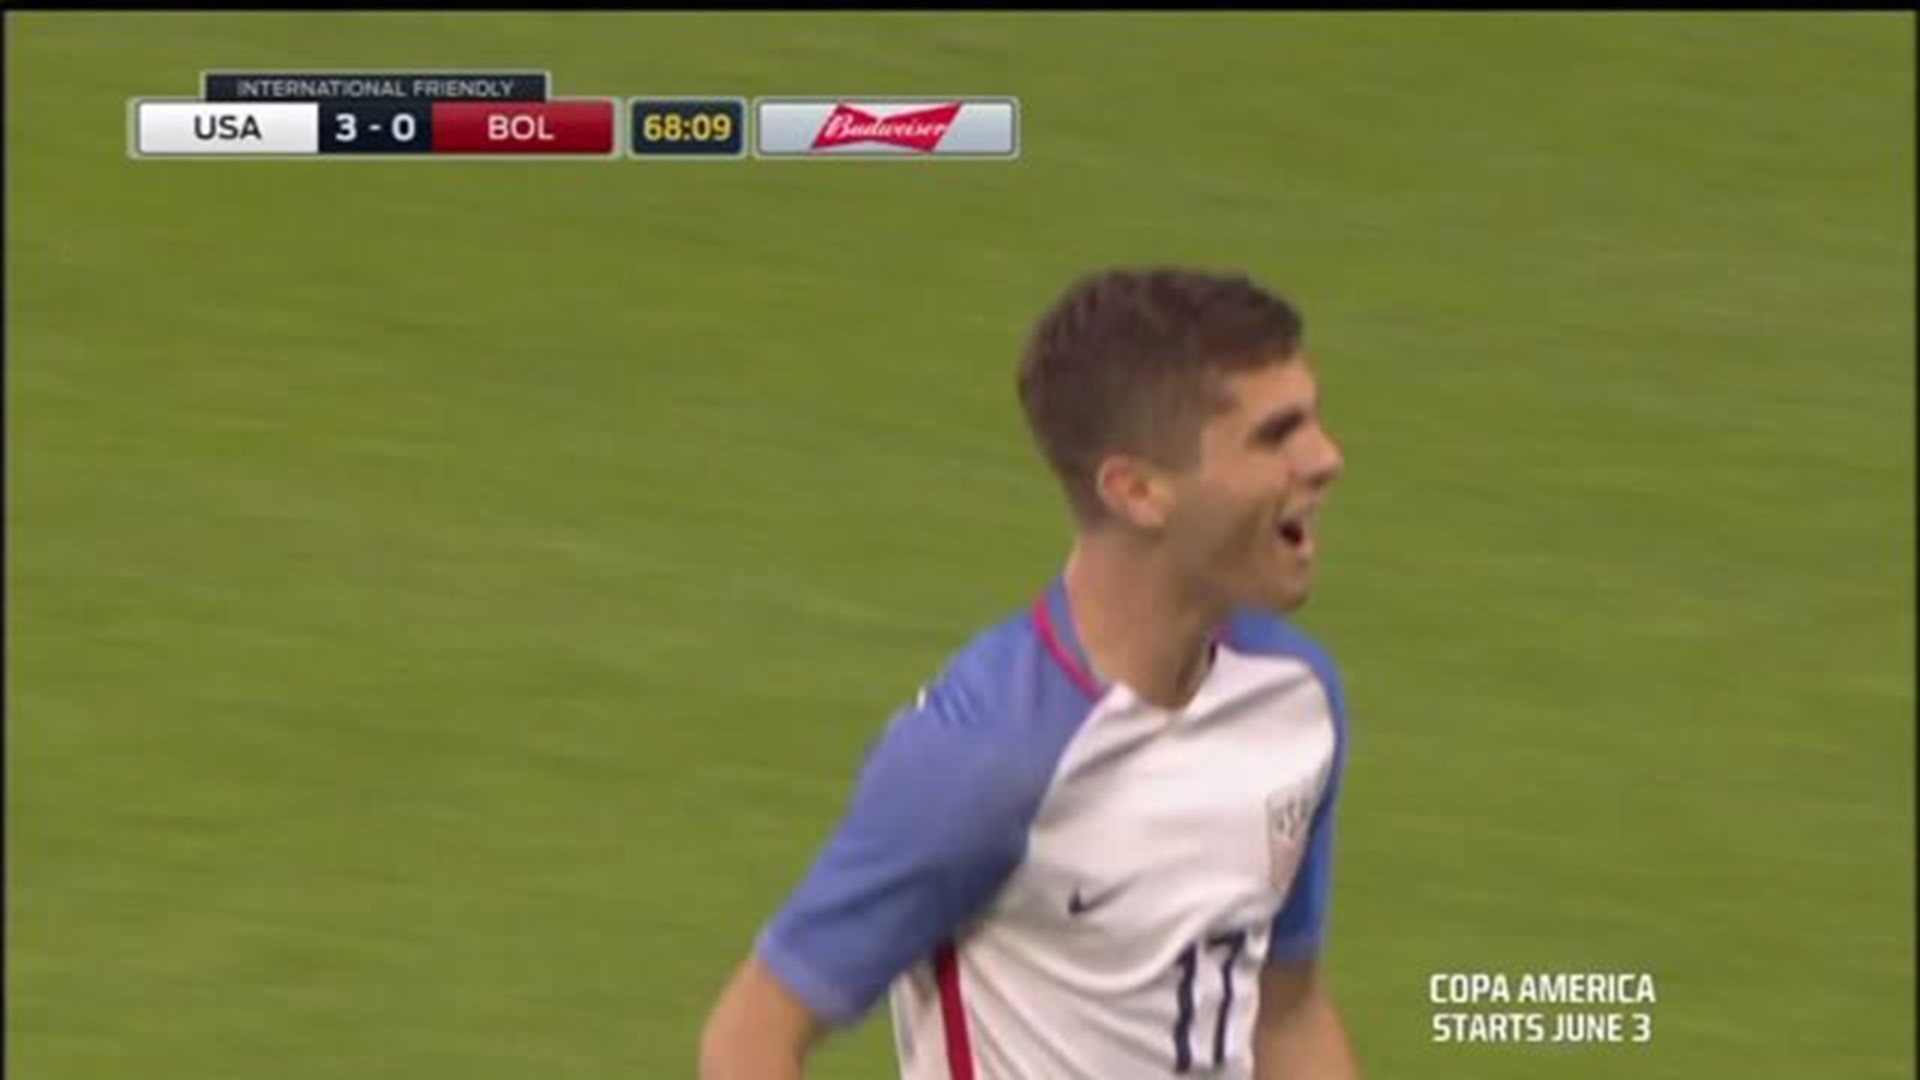 Parents of Hershey teen on U.S. soccer team brimming with pride in their son